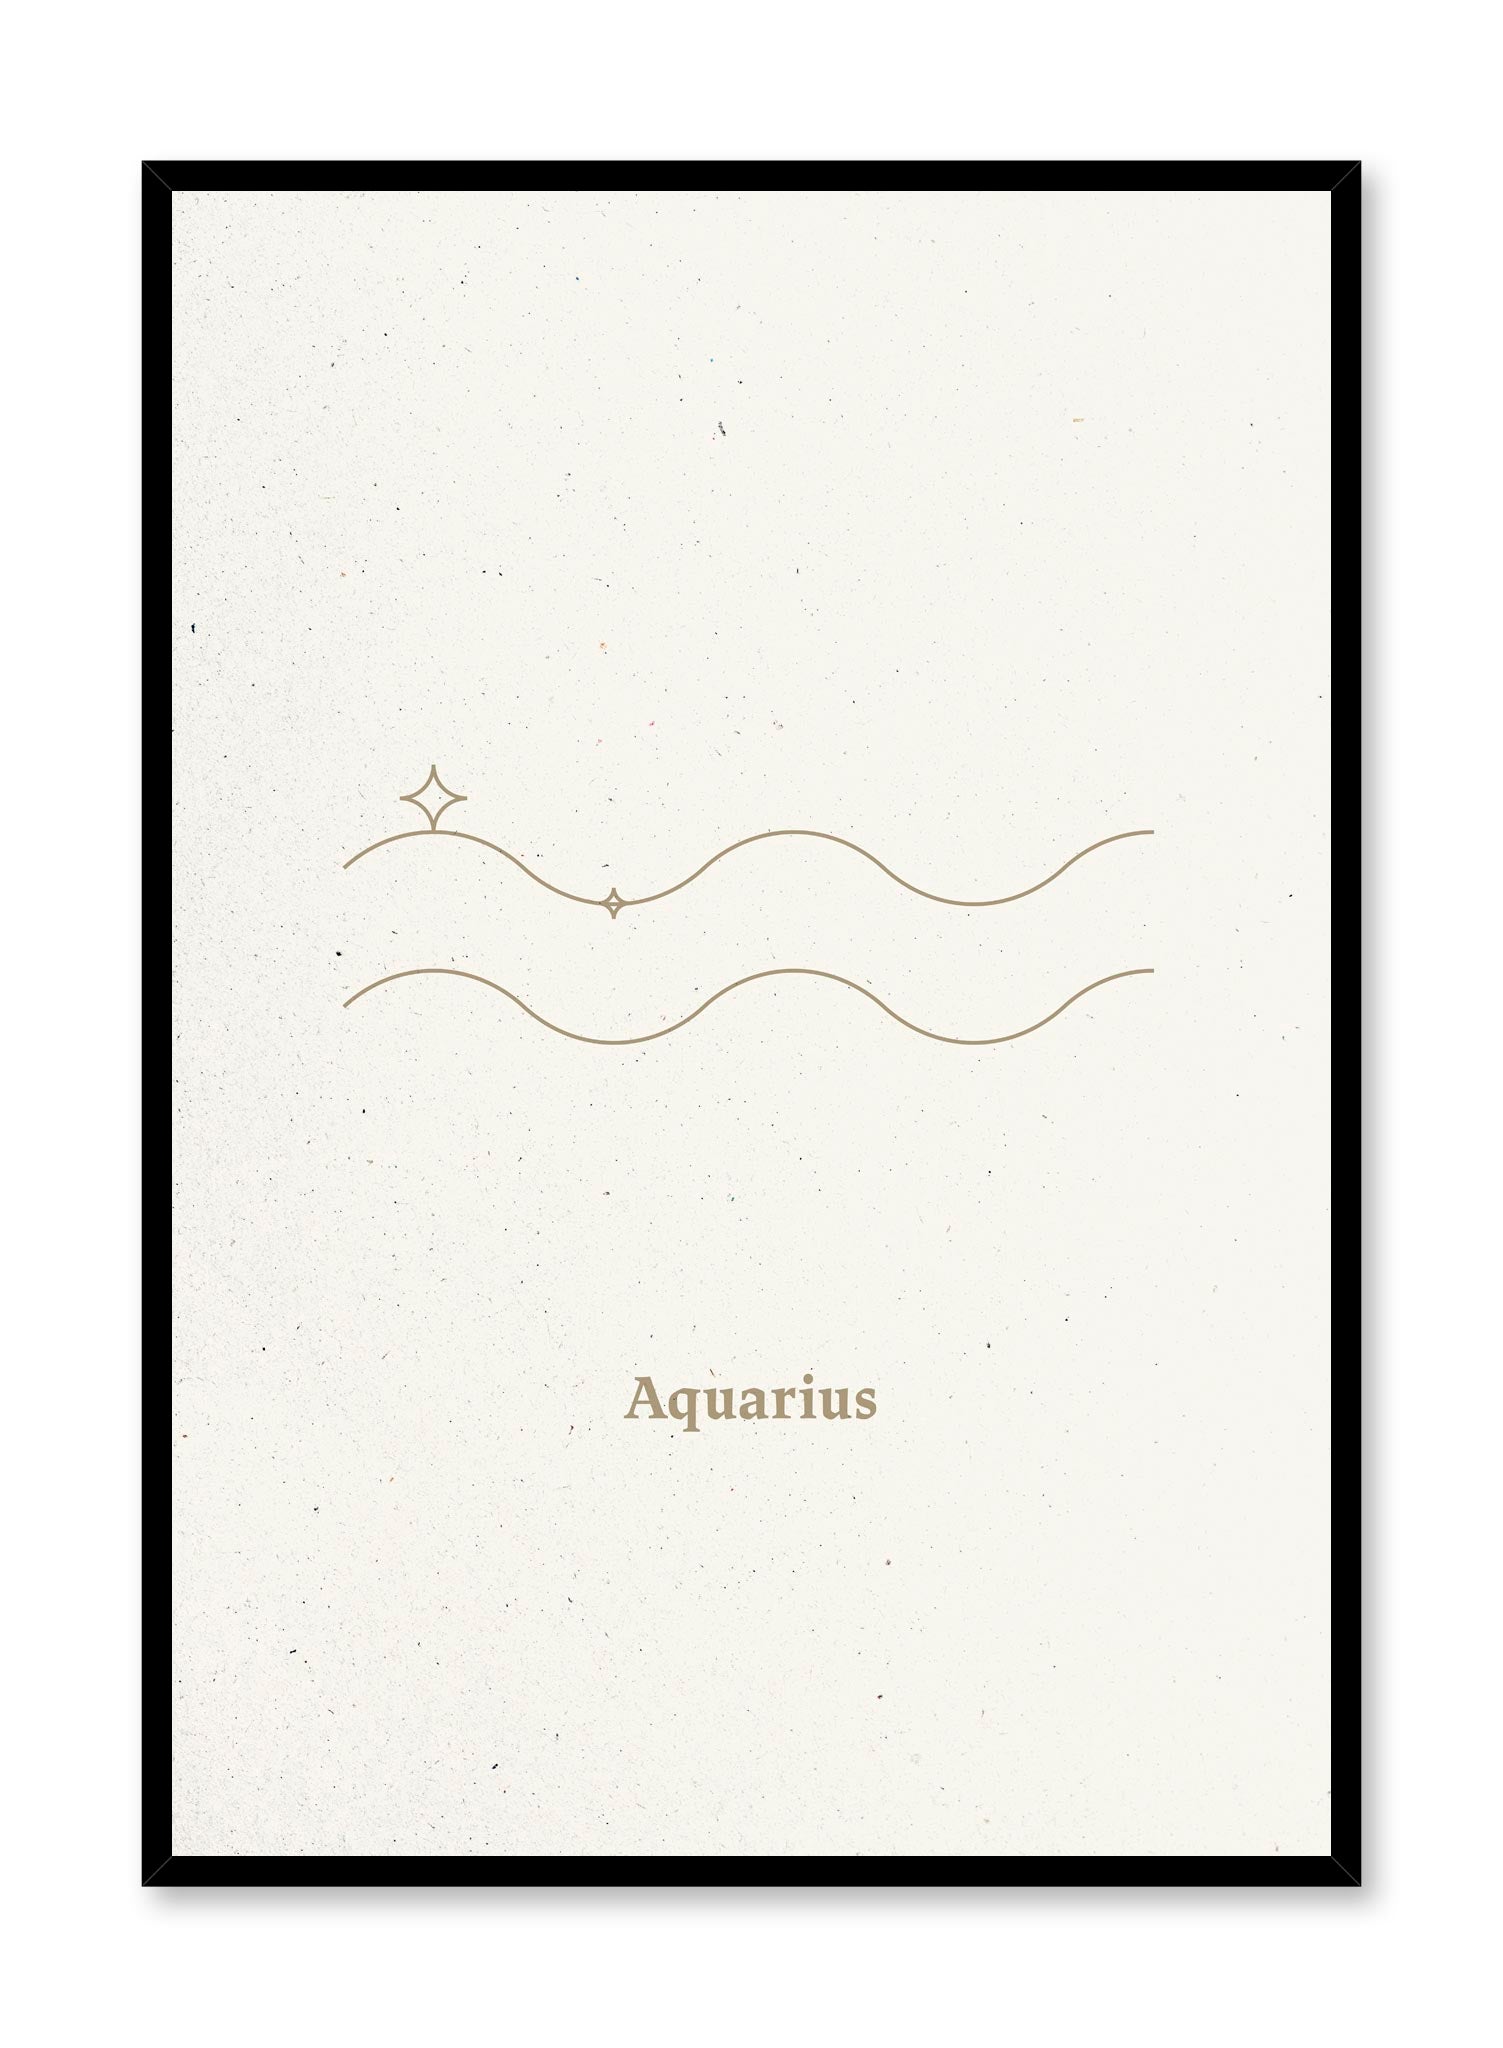 Minimalist celestial illustration poster by Opposite Wall with Aquarius symbol